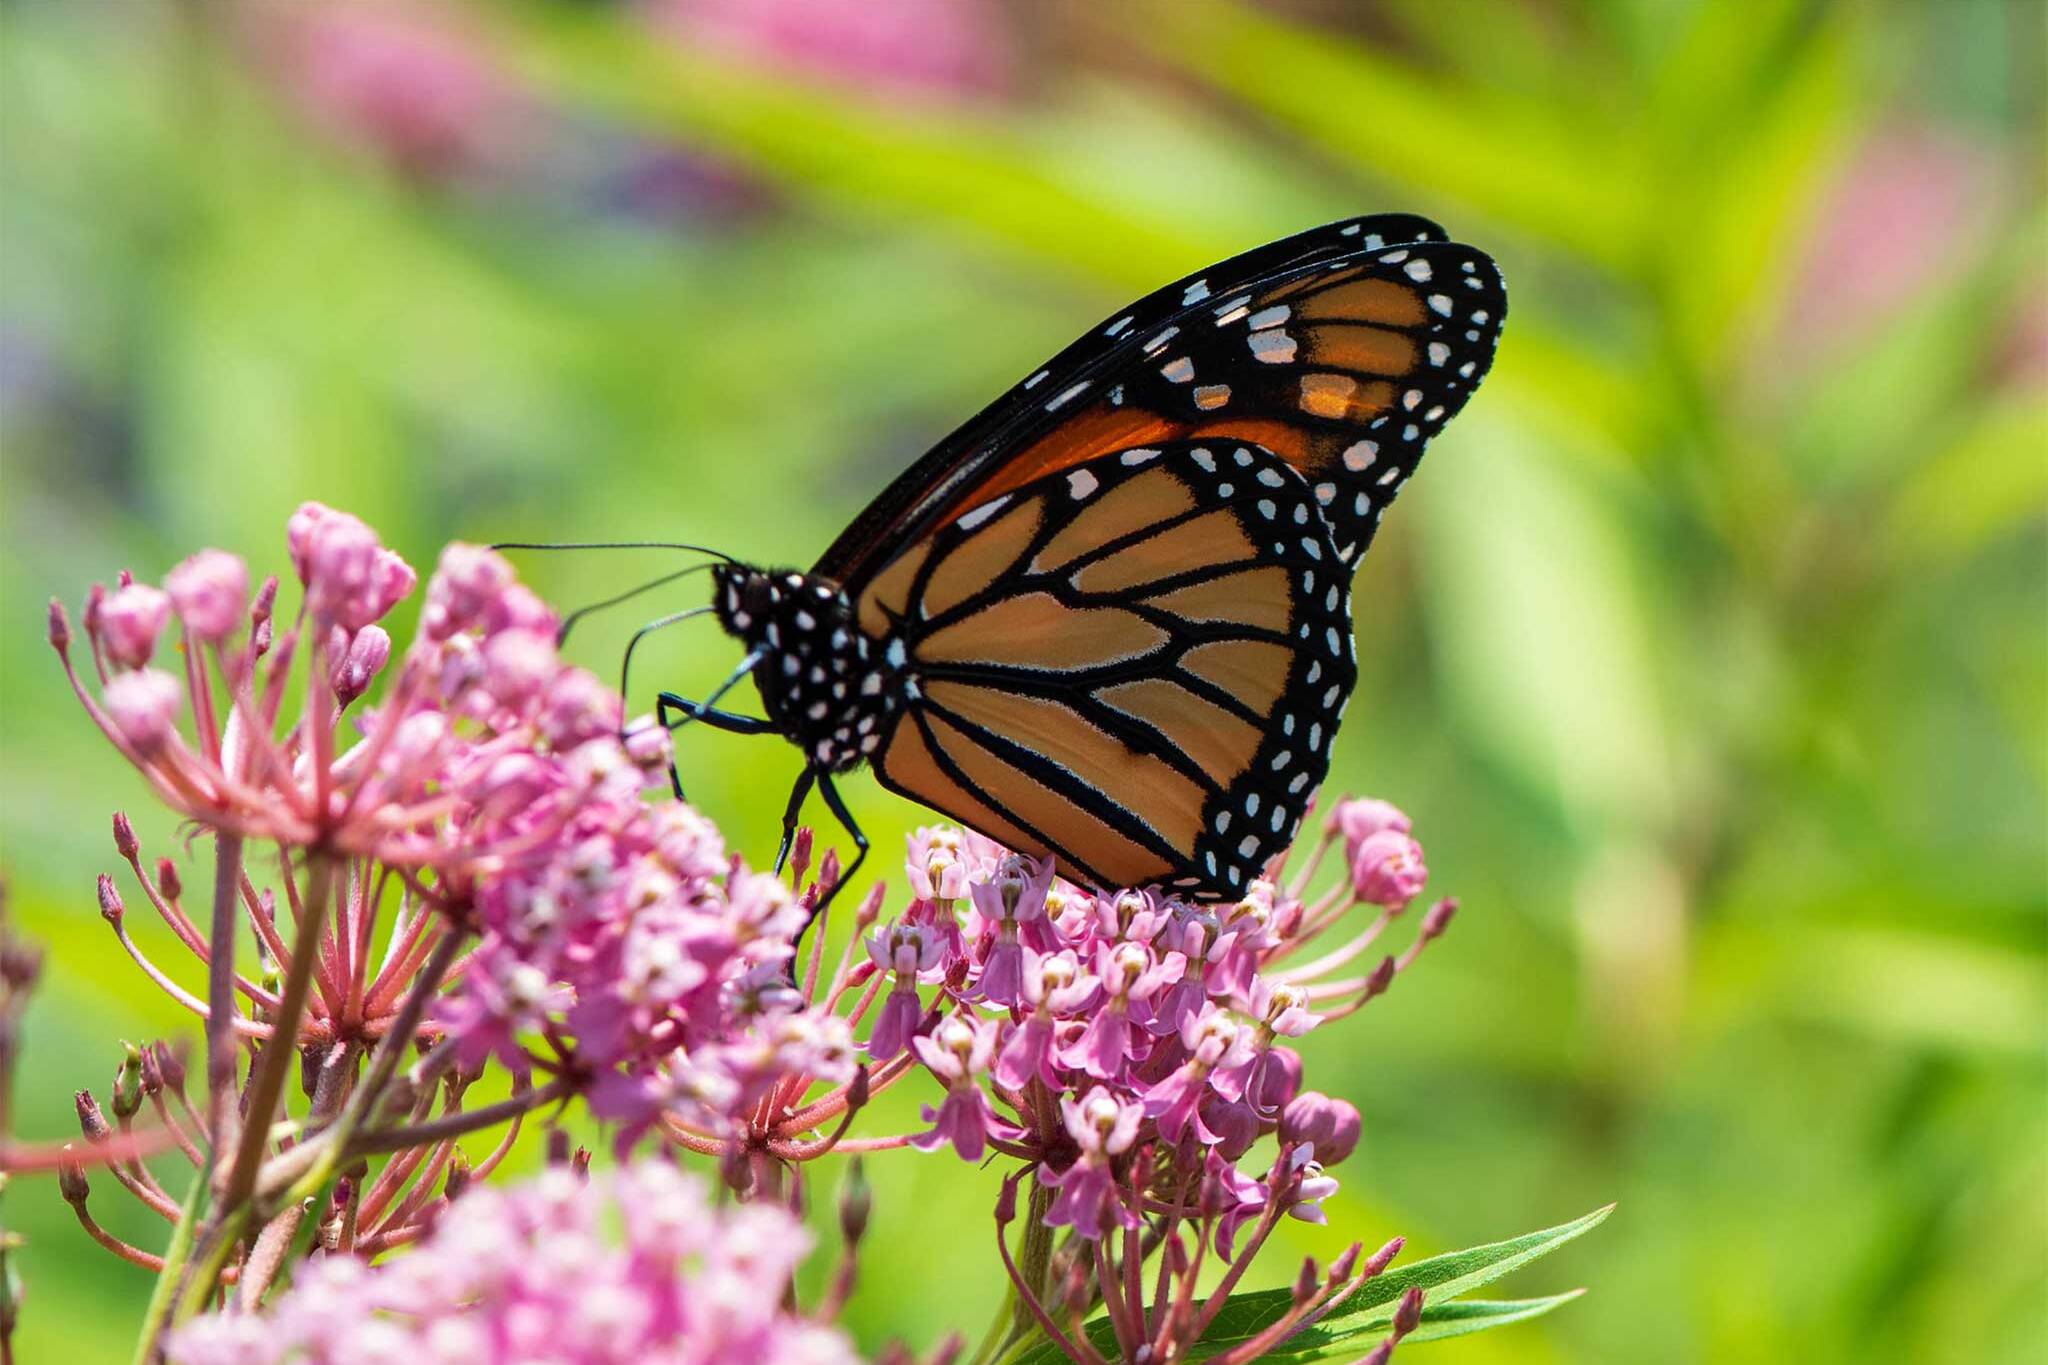 Toronto has a secret outdoor butterfly garden and it's free to visit